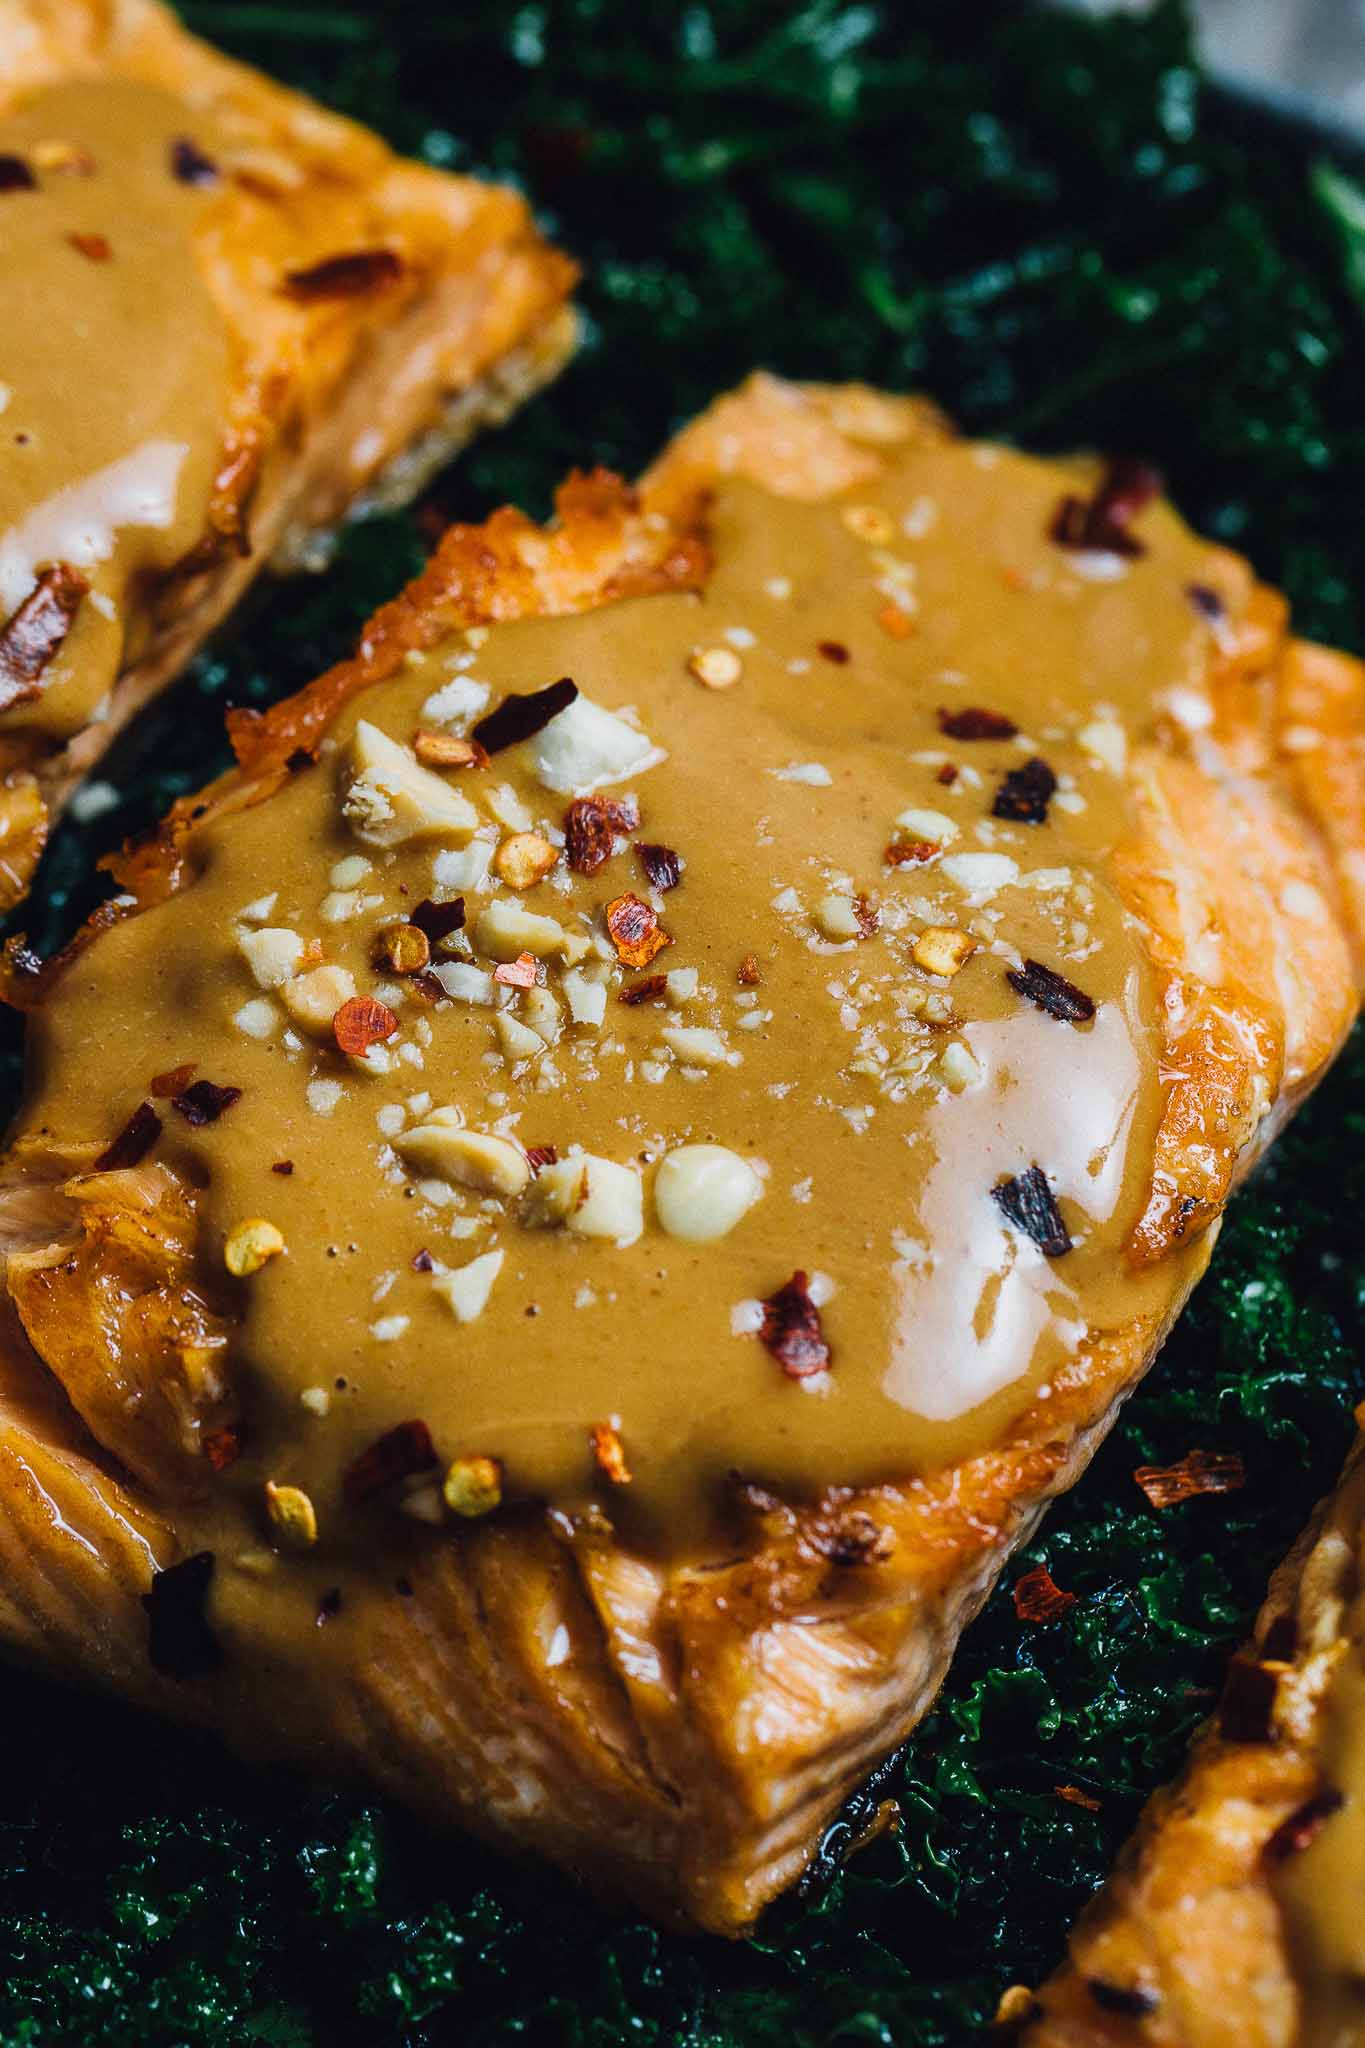 Baked Peanut Salmon: This salmon recipe is perfect for a busy weeknight. Just marinate in the fridge overnight, cook for 20 minutes and you’re done!